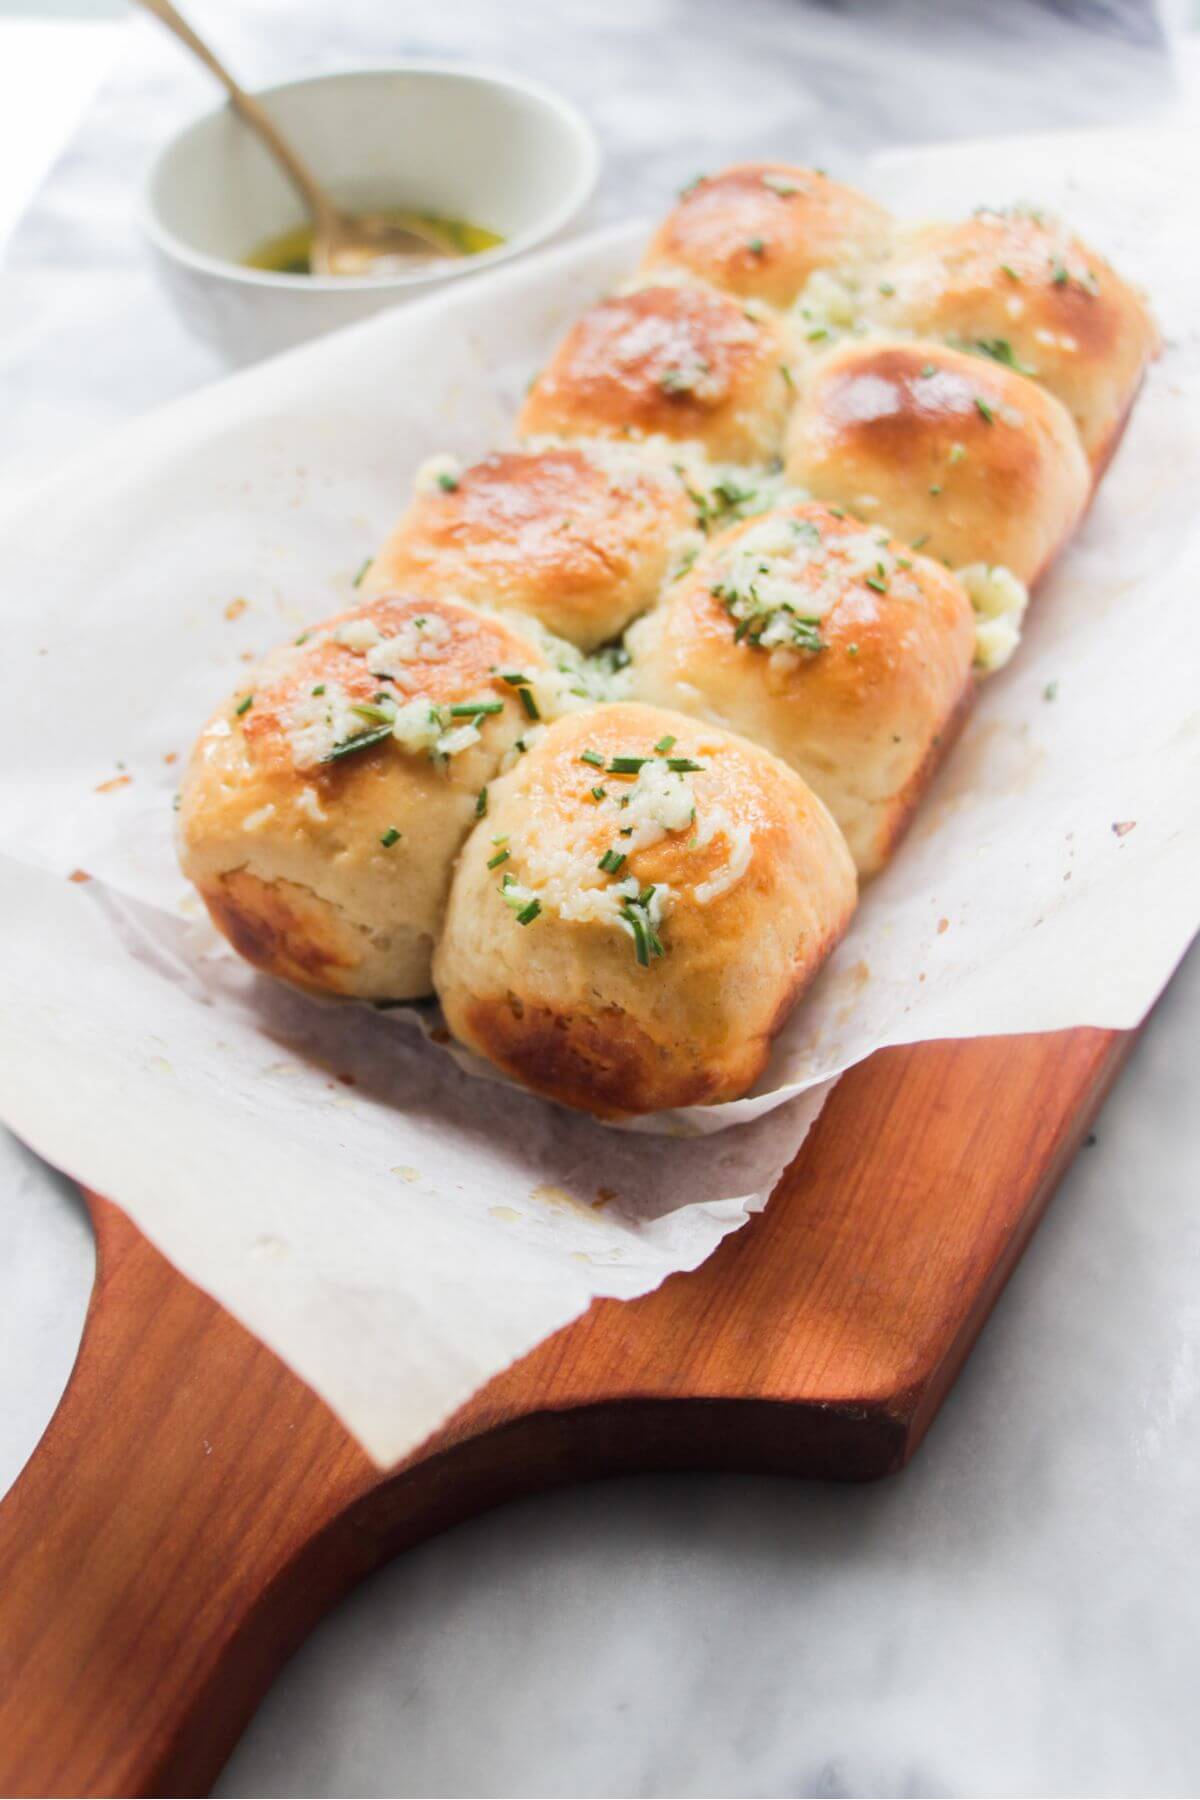 8 small rolls topped with garlic butter on a baking paper lined wooden board with bowl of garlic butter in the background.